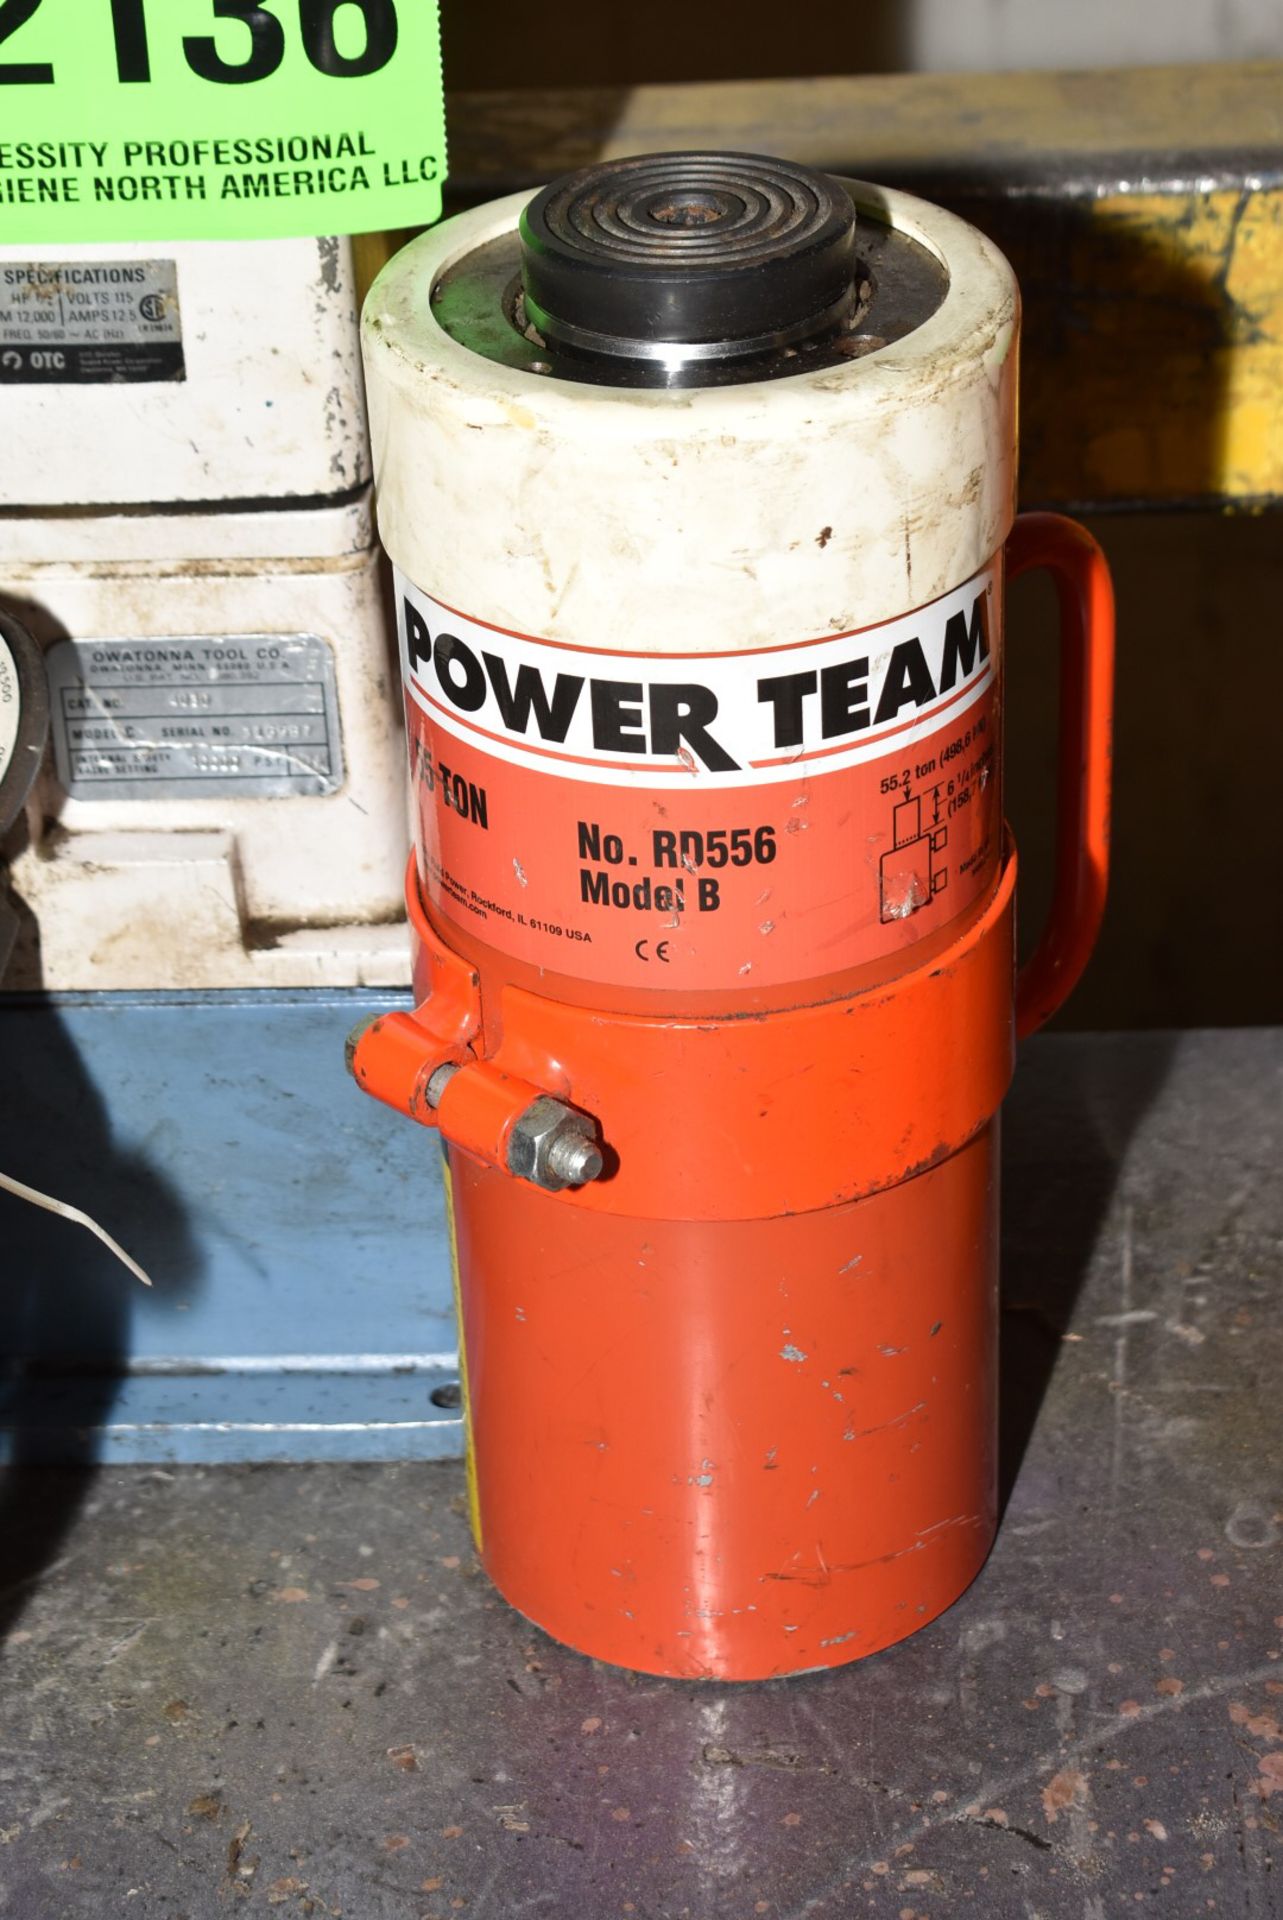 OTC 10000 PSI HYDRAULIC POWER PACK WITH POWER TEAM 55 TON JACK, S/N 315587 - Image 3 of 4